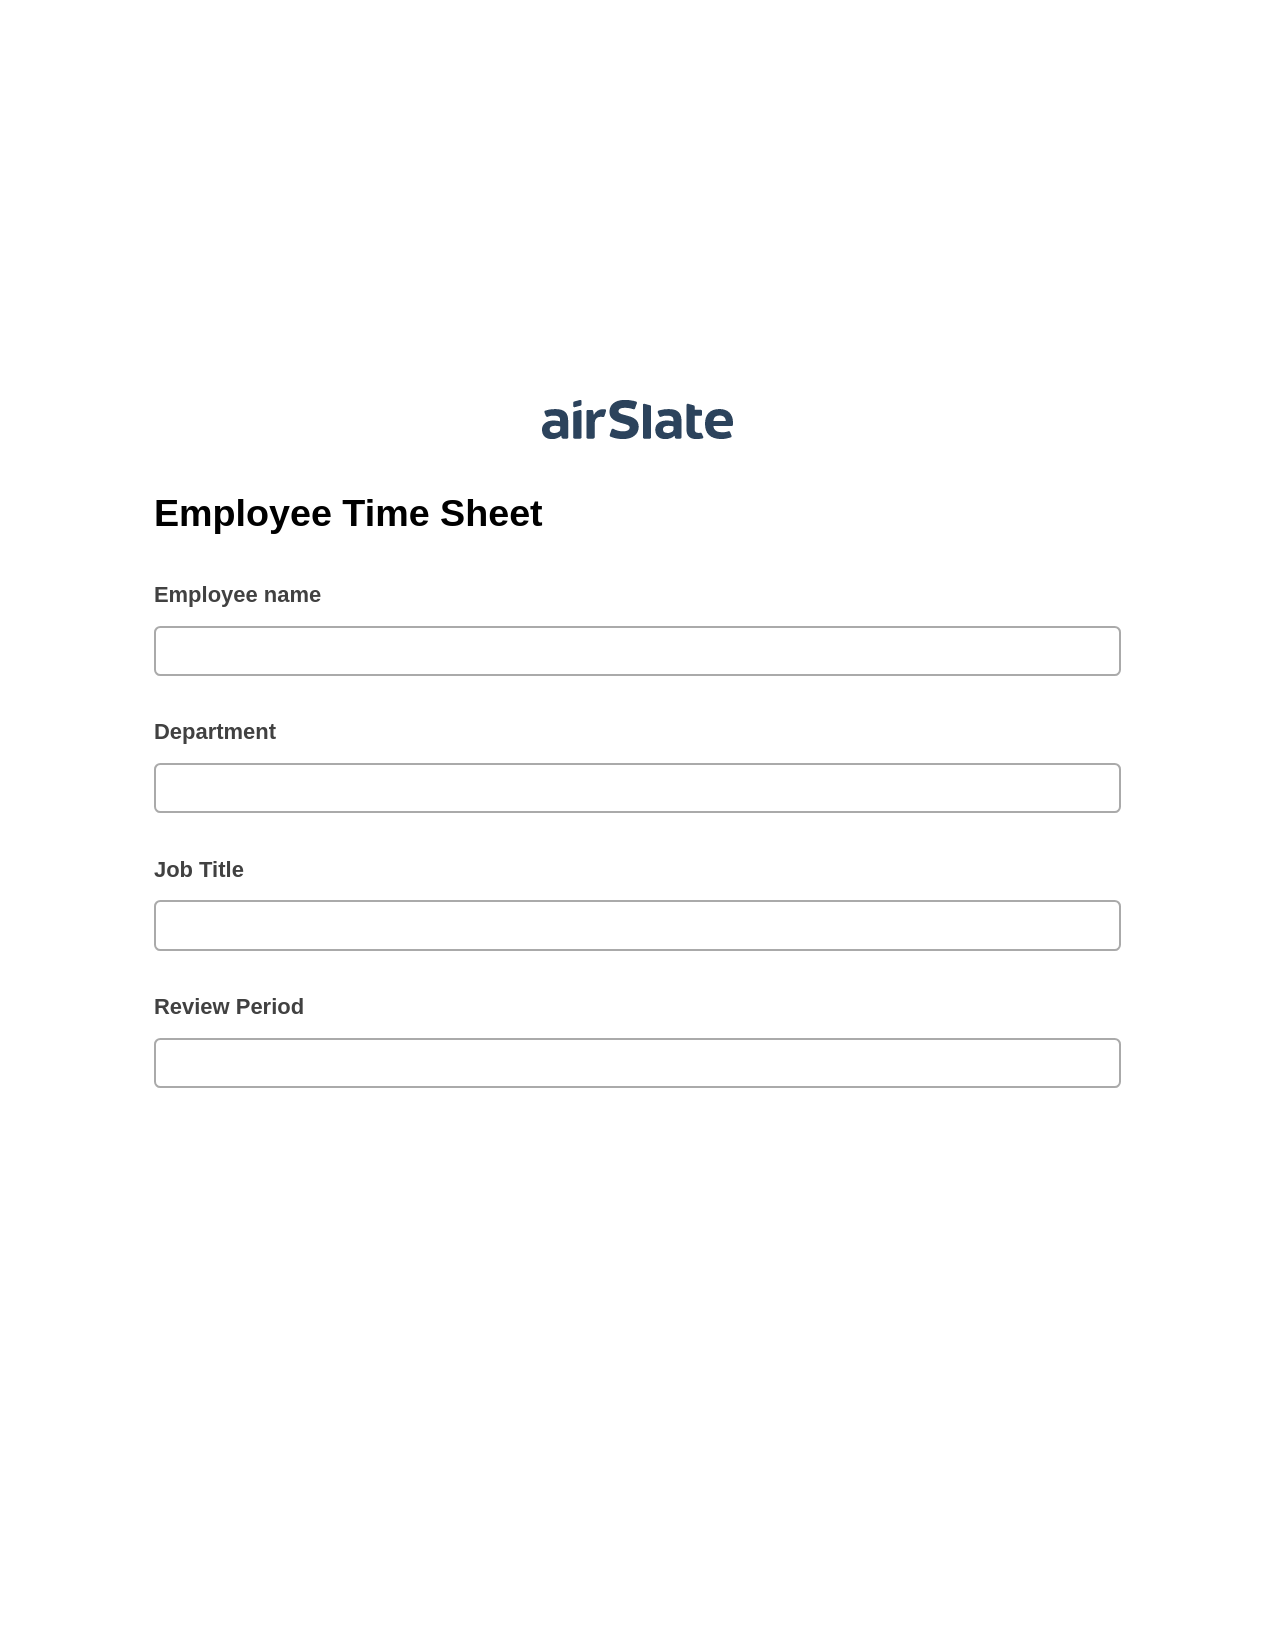 Employee Time Sheet Pre-fill Dropdowns from Excel Bot, Custom Field's Value Bot, Archive to Dropbox Bot